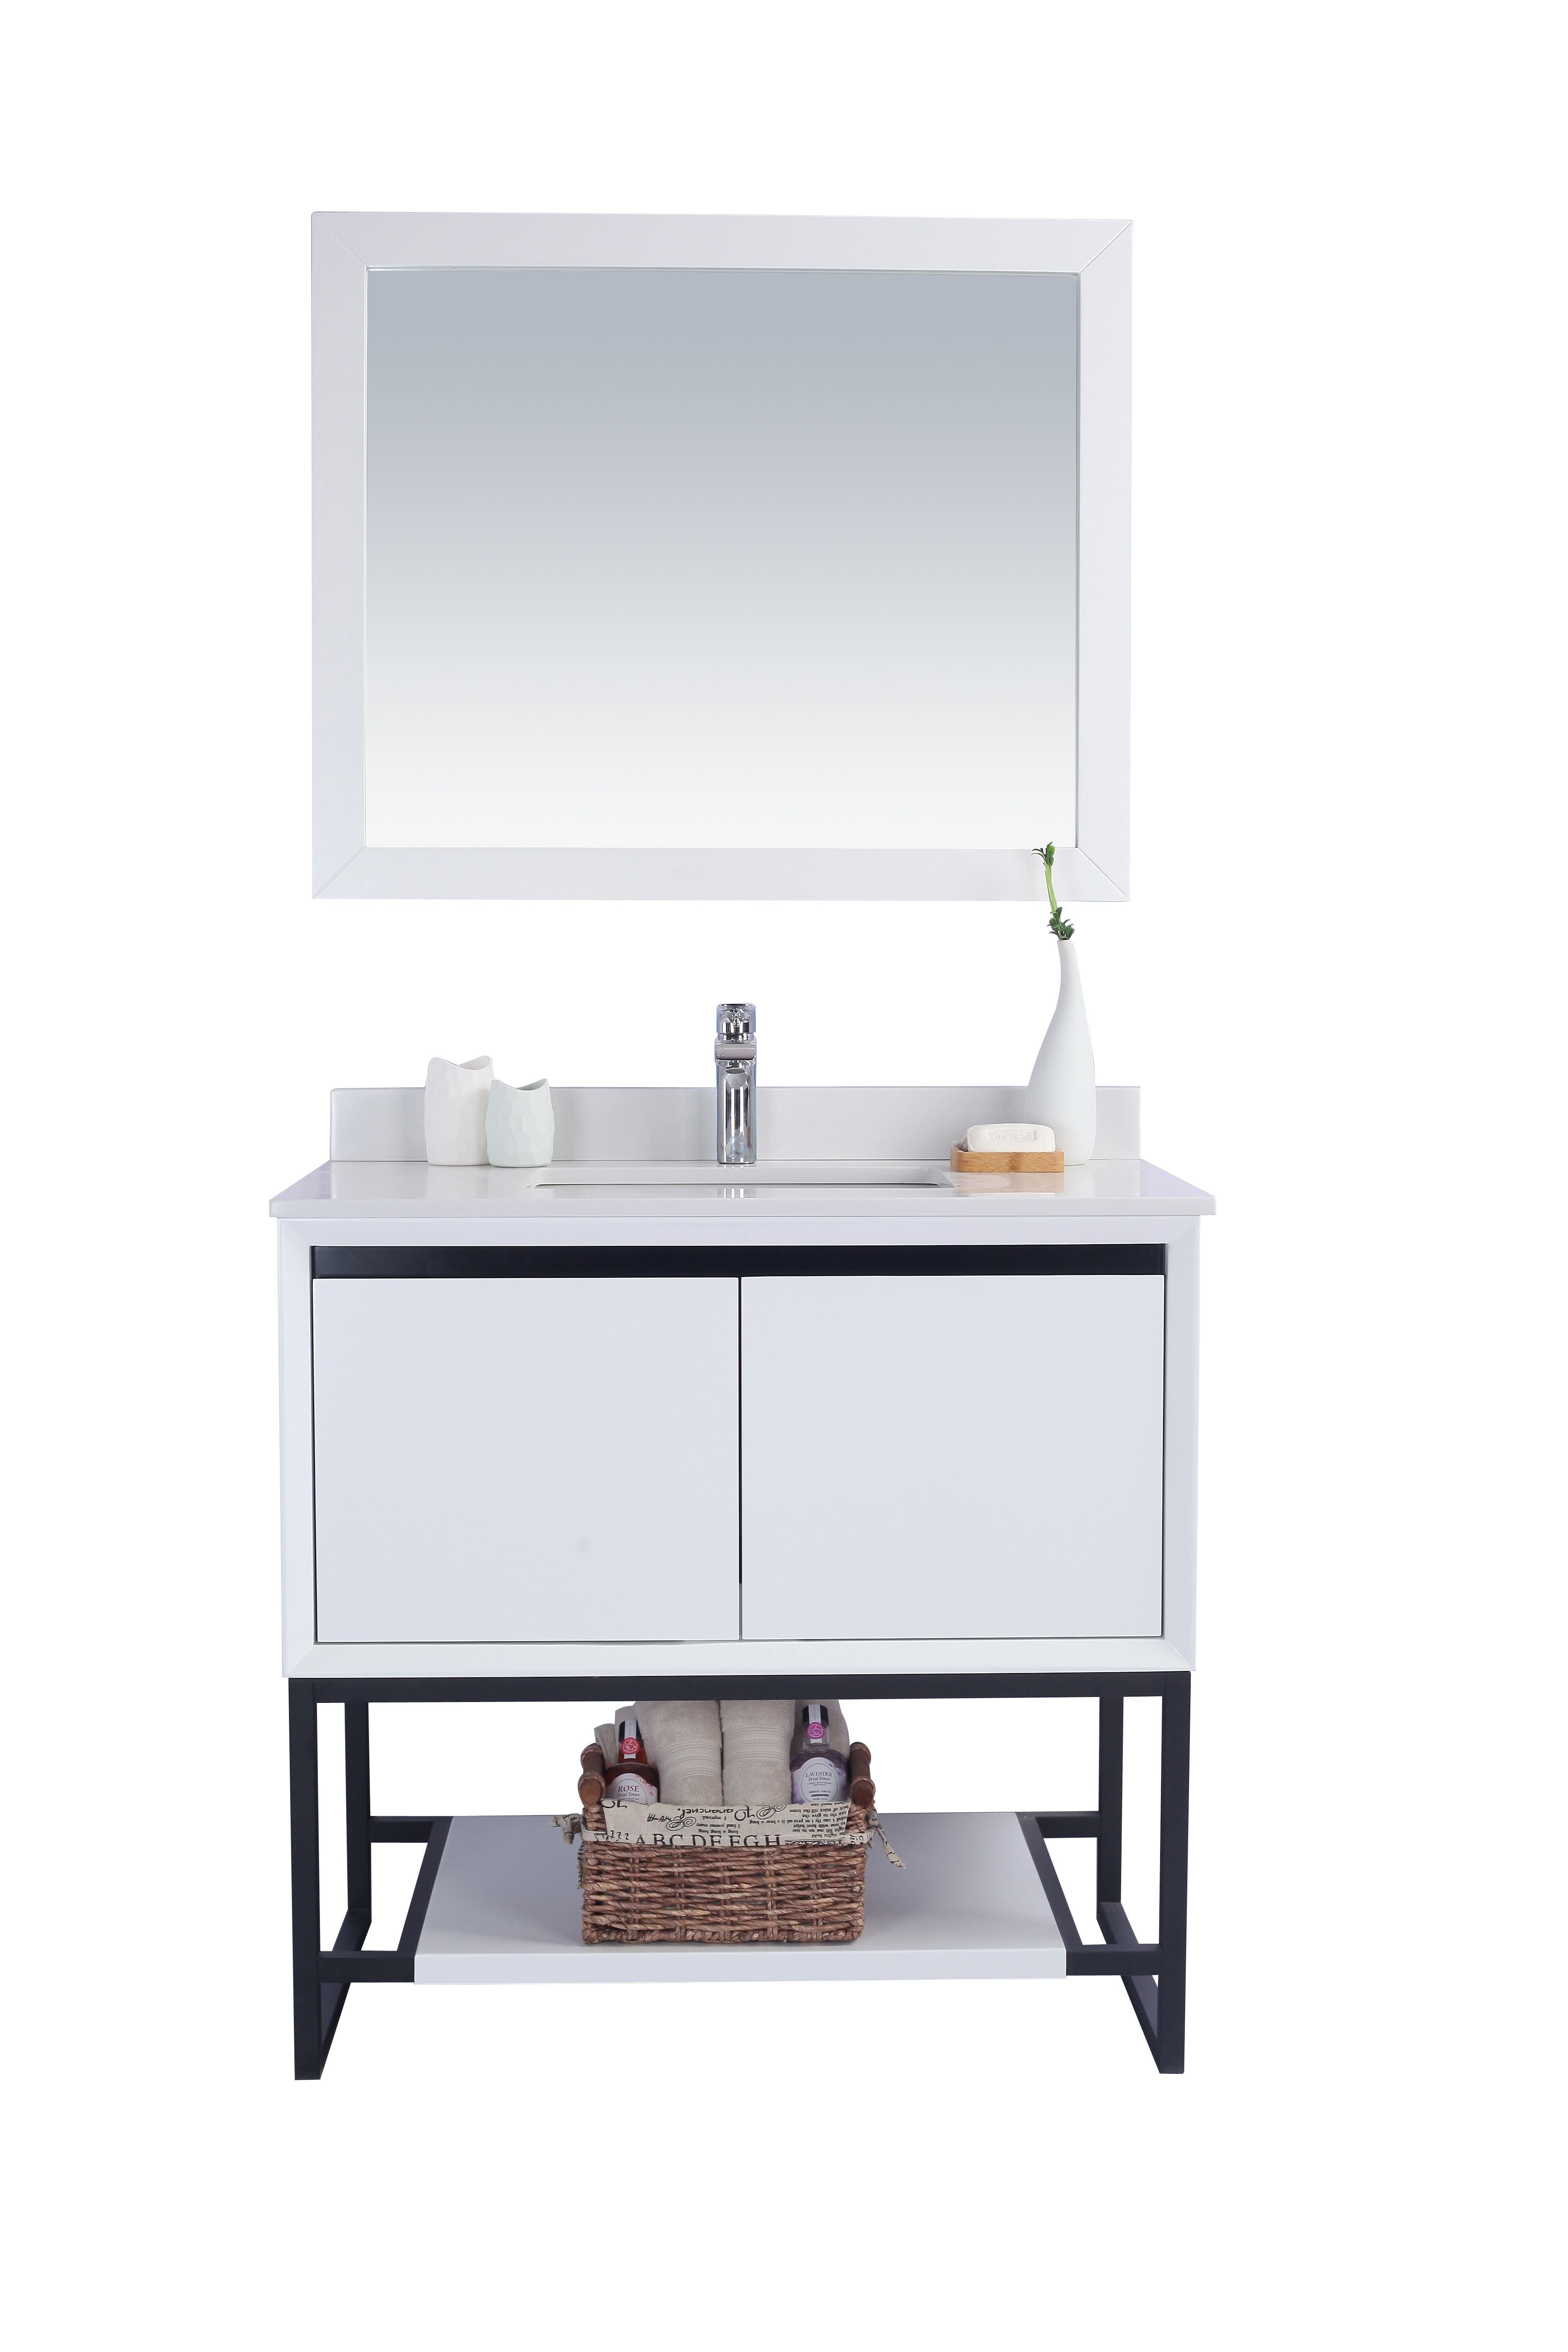 36" White Bathroom Vanity Cabinet with Top and Mirror Options